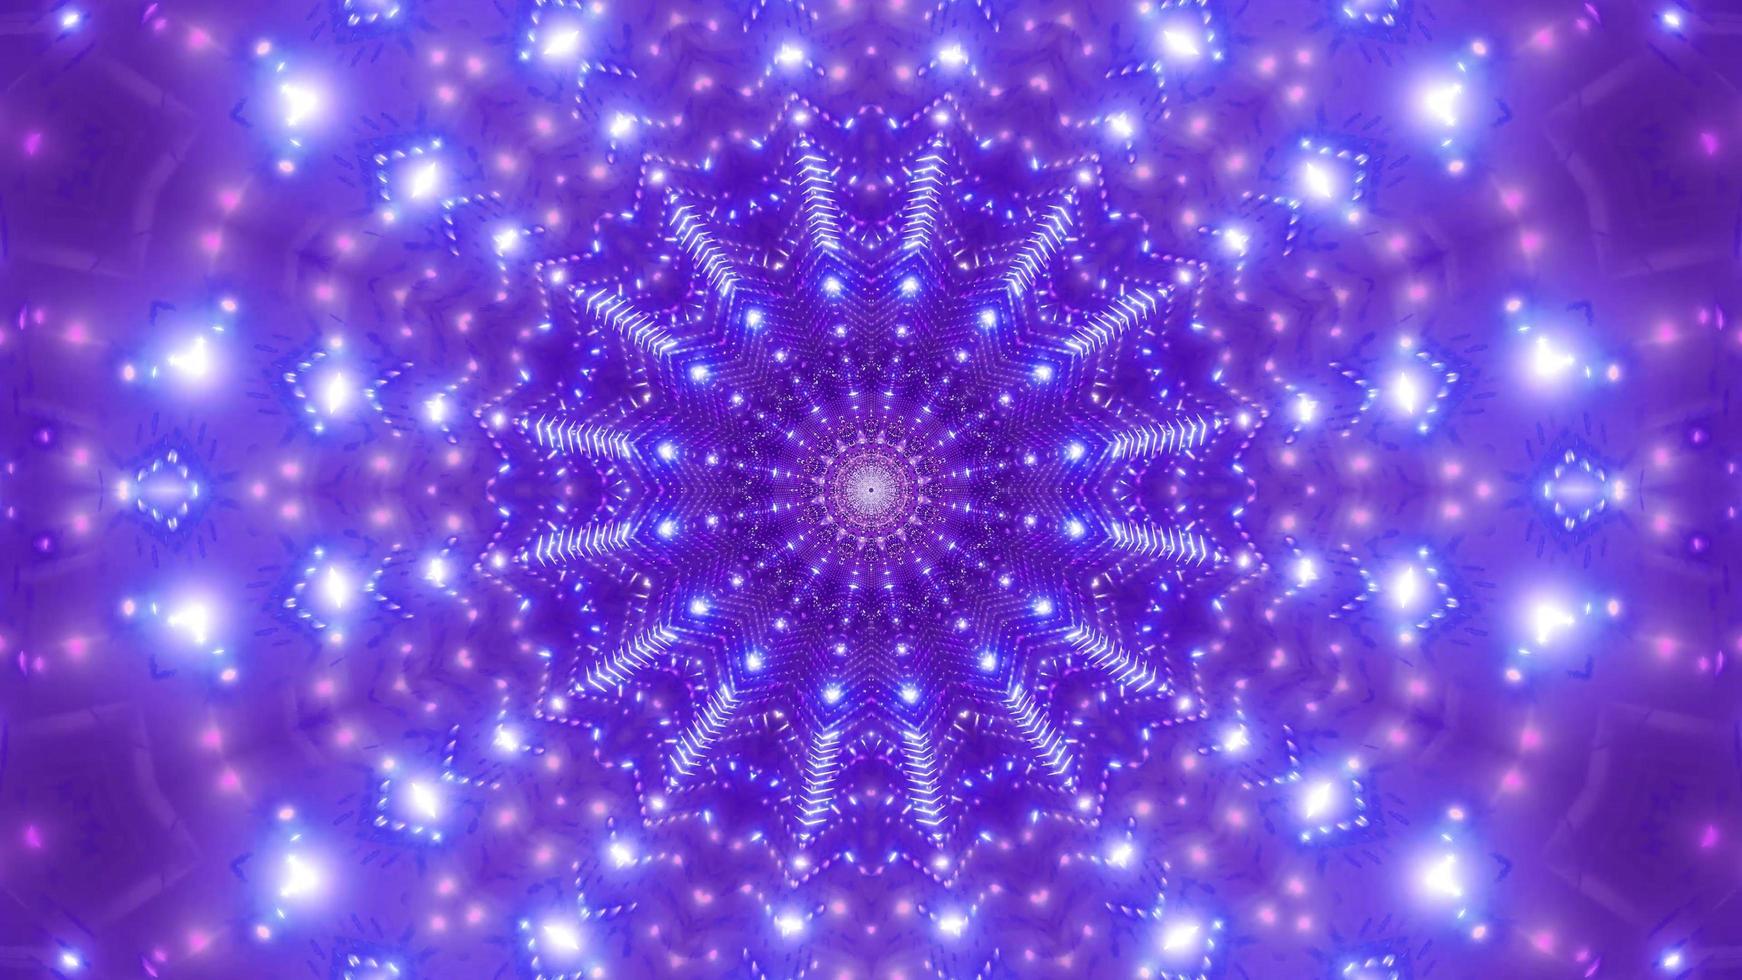 Blue, purple, and white light and shapes kaleidoscope 3d illustration for background or wallpaper photo